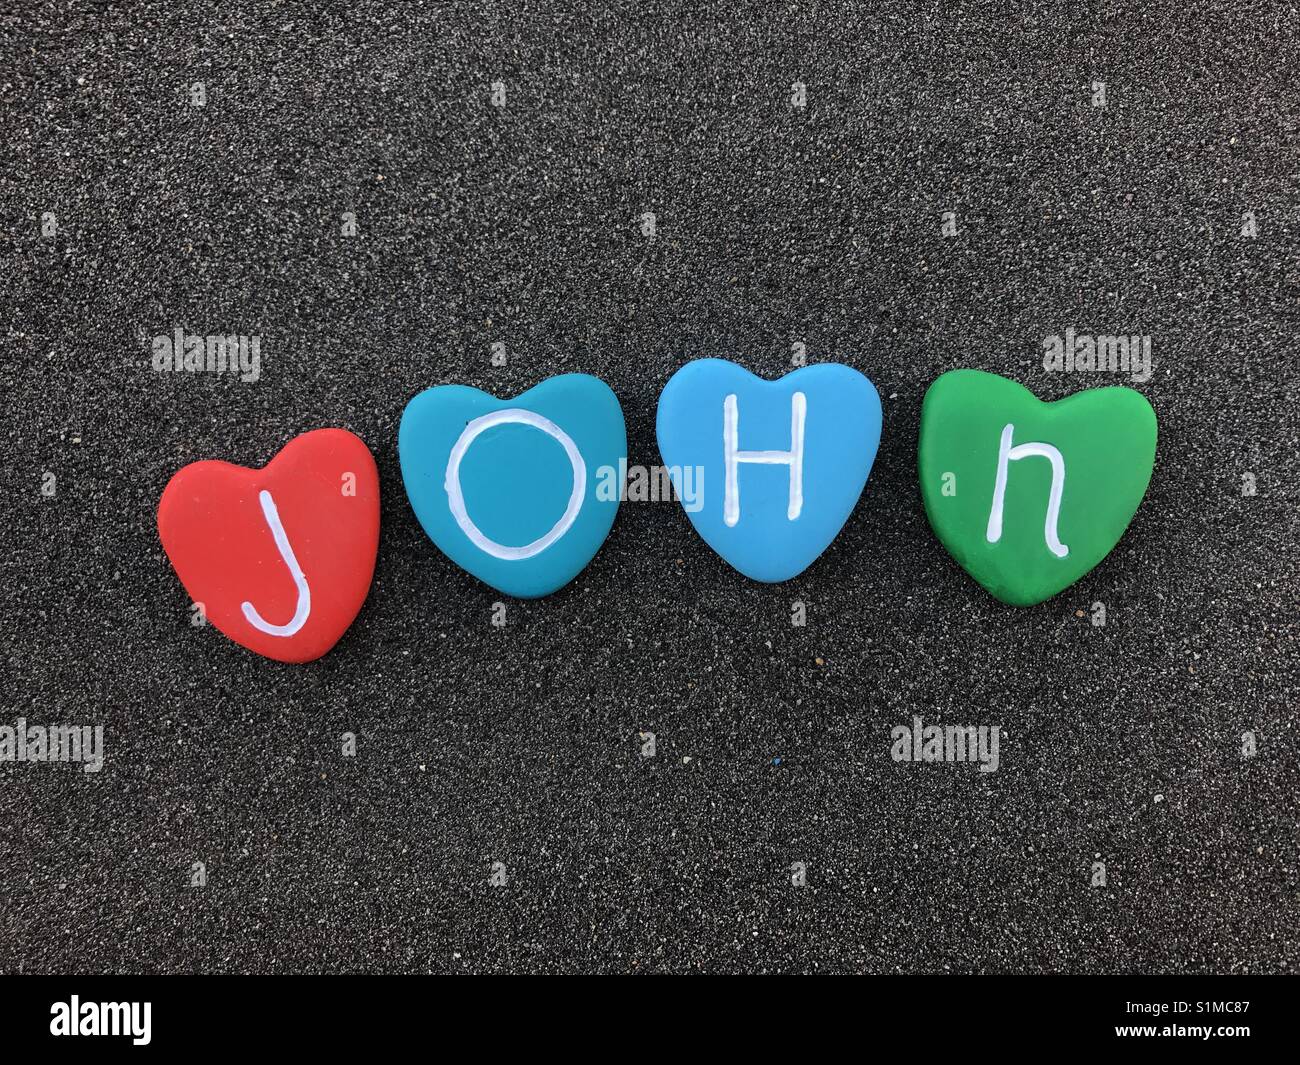 John, masculine name with colored heart stones over black volcanic sand Stock Photo